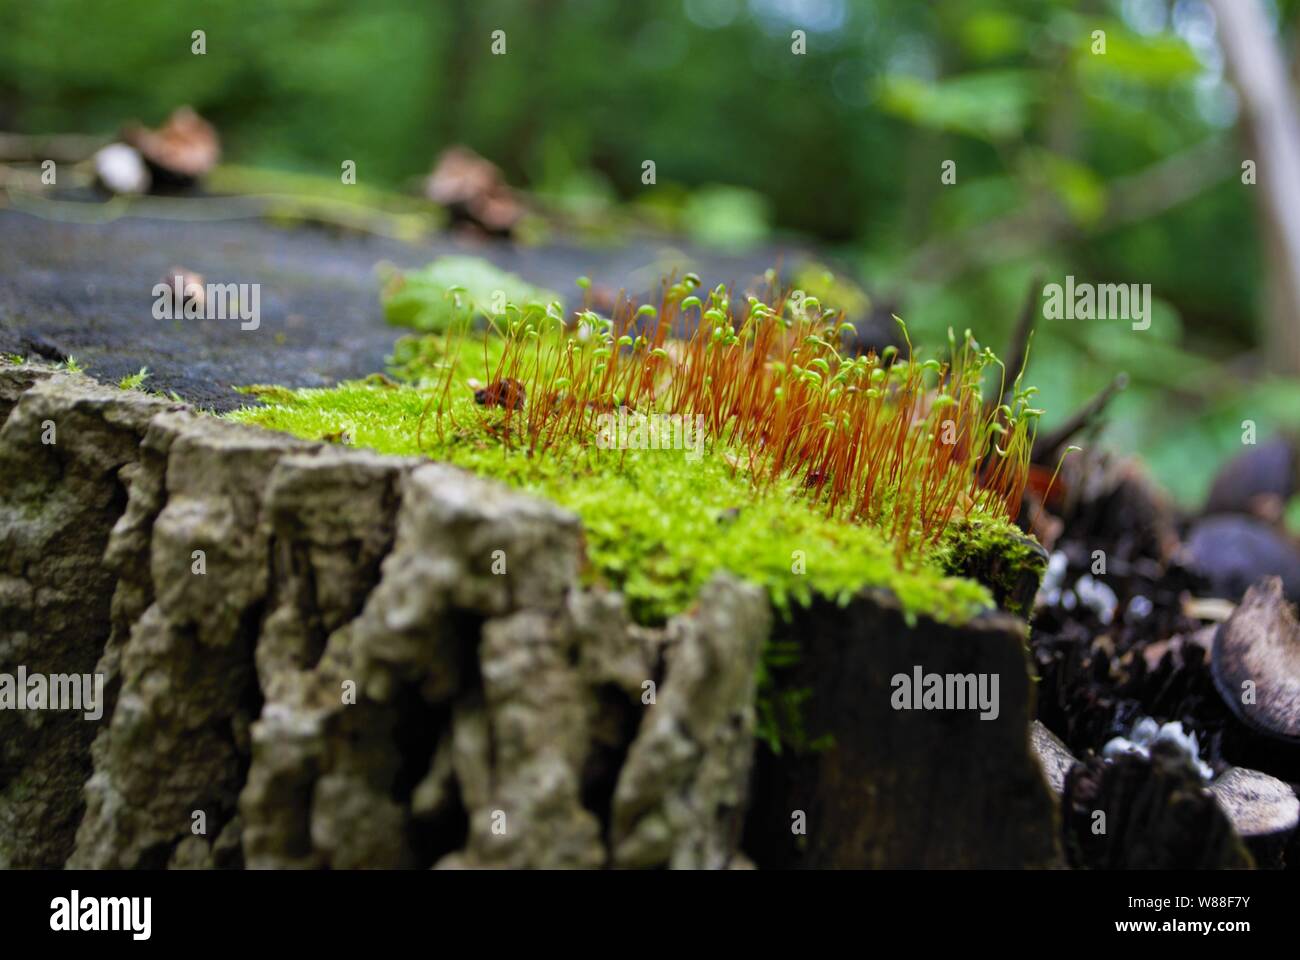 Moss and new growth on a tree stump Stock Photo